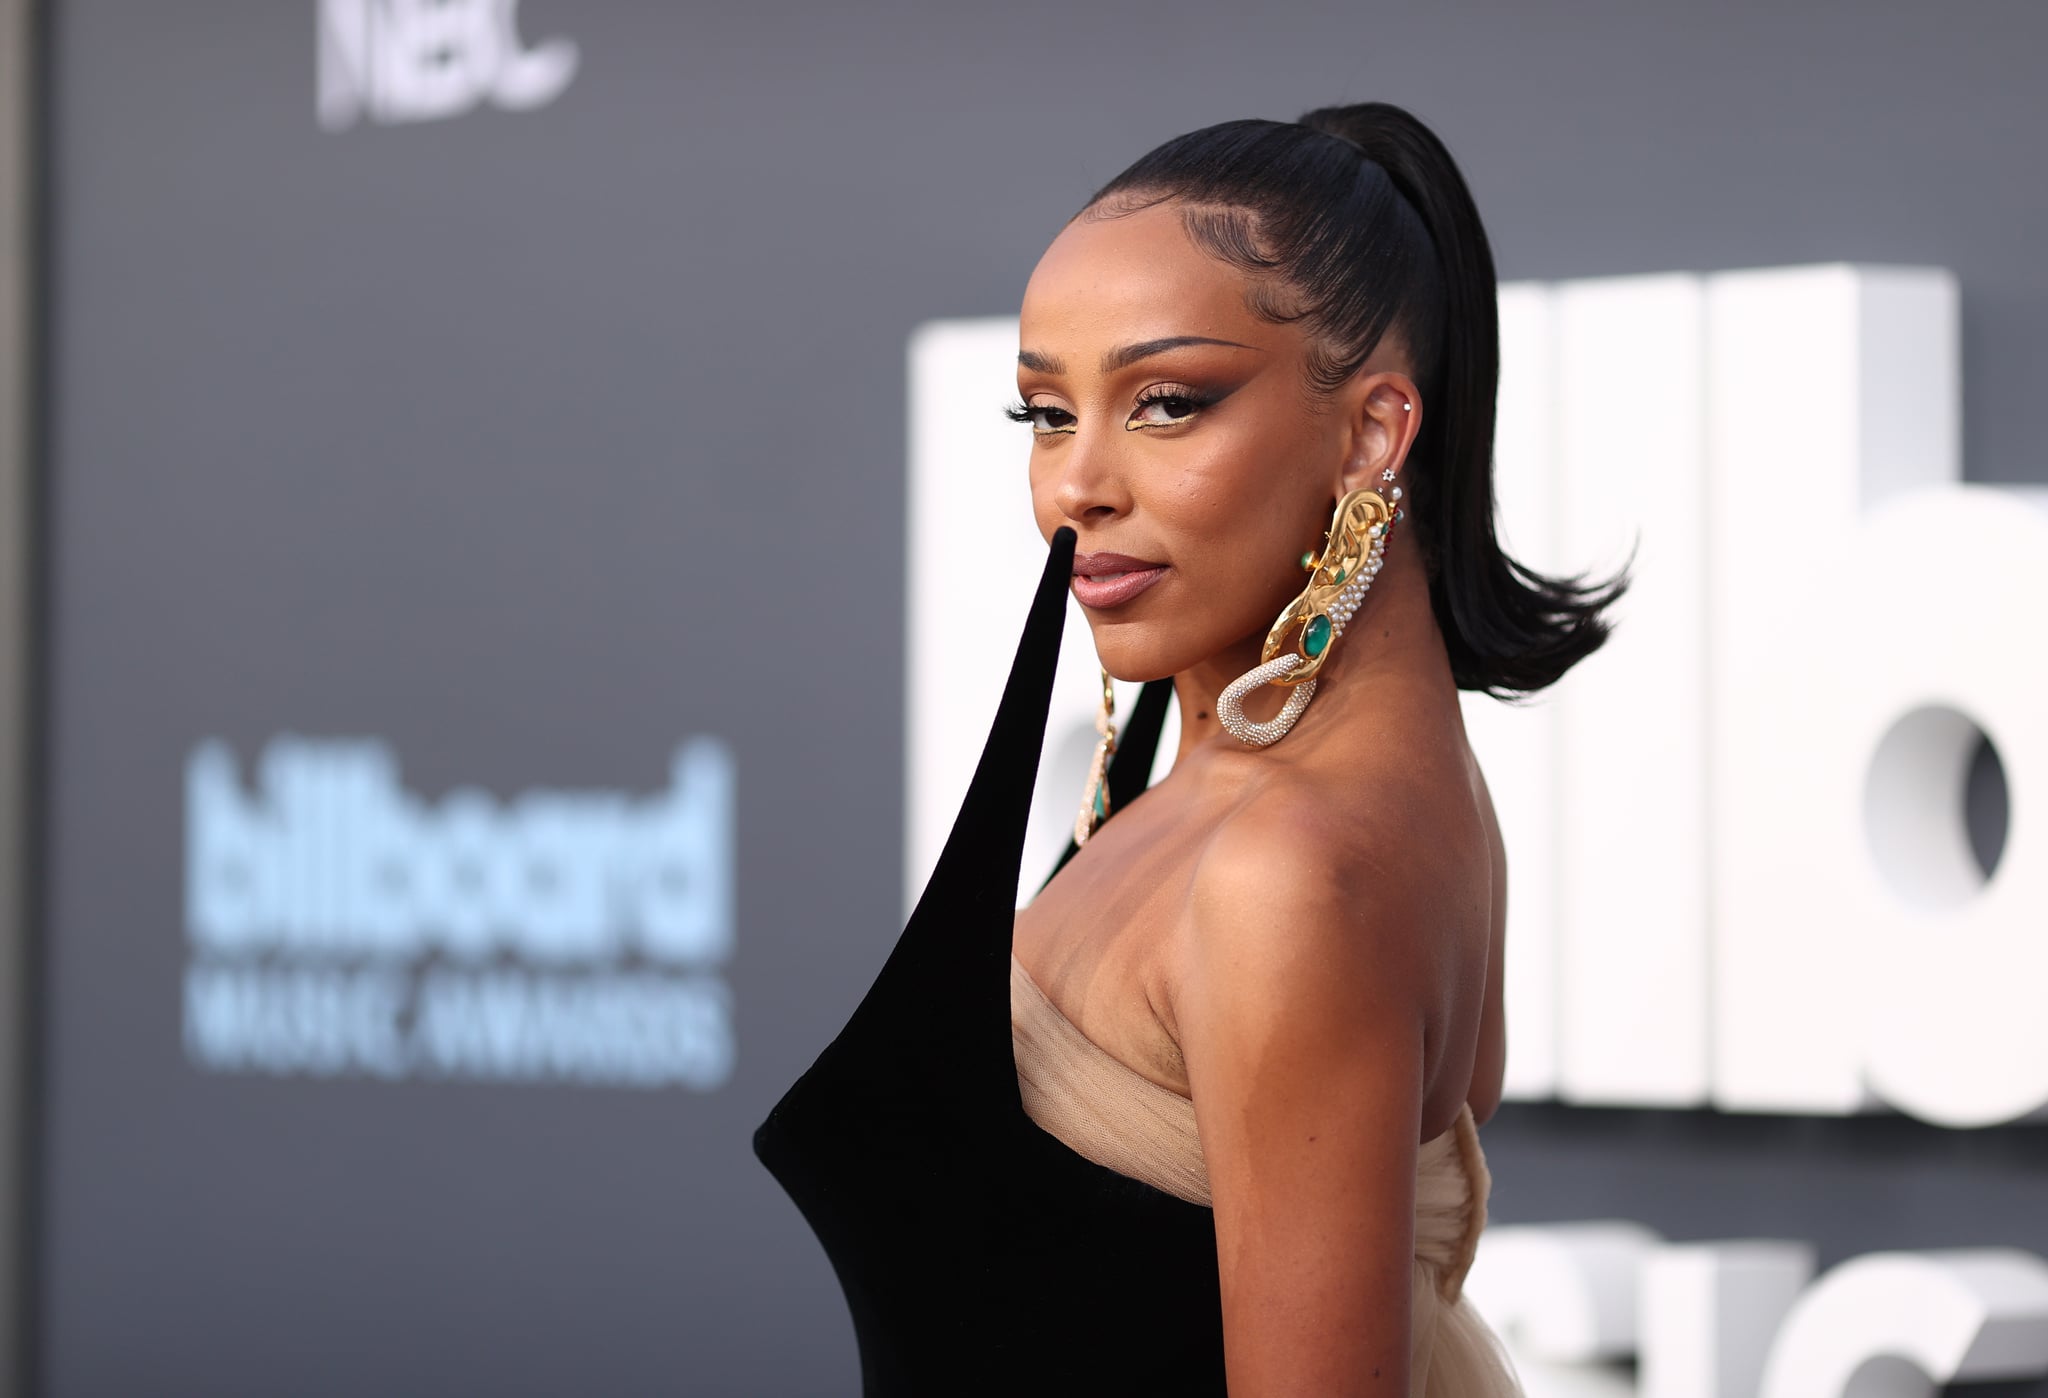 LAS VEGAS, NV - May 15:  2022 BILLBOARD MUSIC AWARDS -- Pictured: Doja Cat arrives to the 2022 Billboard Music Awards held at the MGM Grand Garden Arena on May 15, 2022. -- (Photo by Christopher Polk/NBC/NBCU Photo Bank via Getty Images)